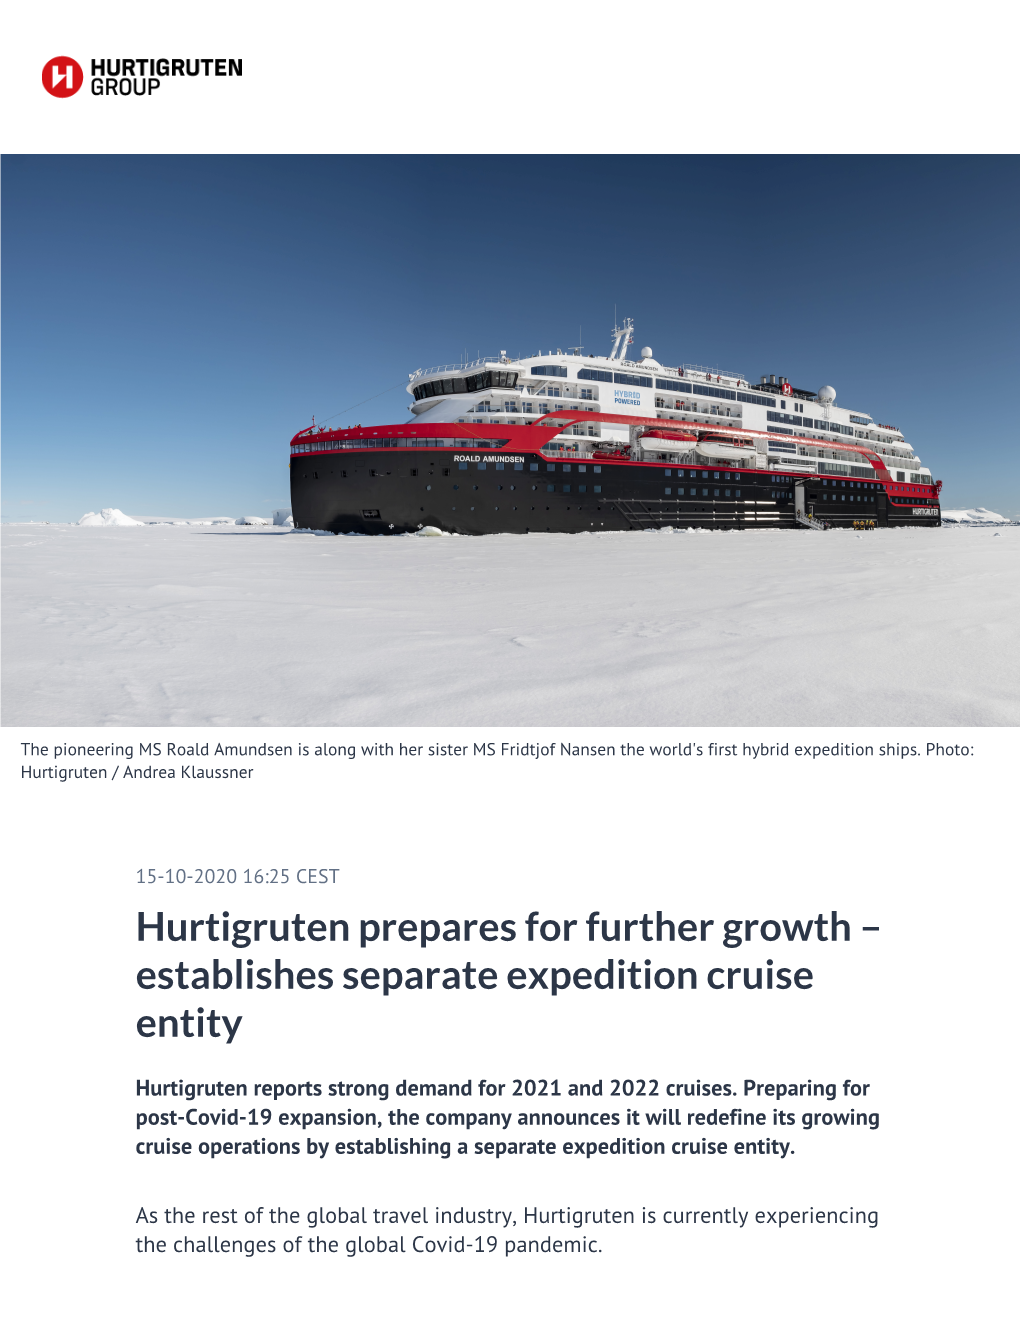 Hurtigruten Prepares for Further Growth – Establishes Separate Expedition Cruise Entity